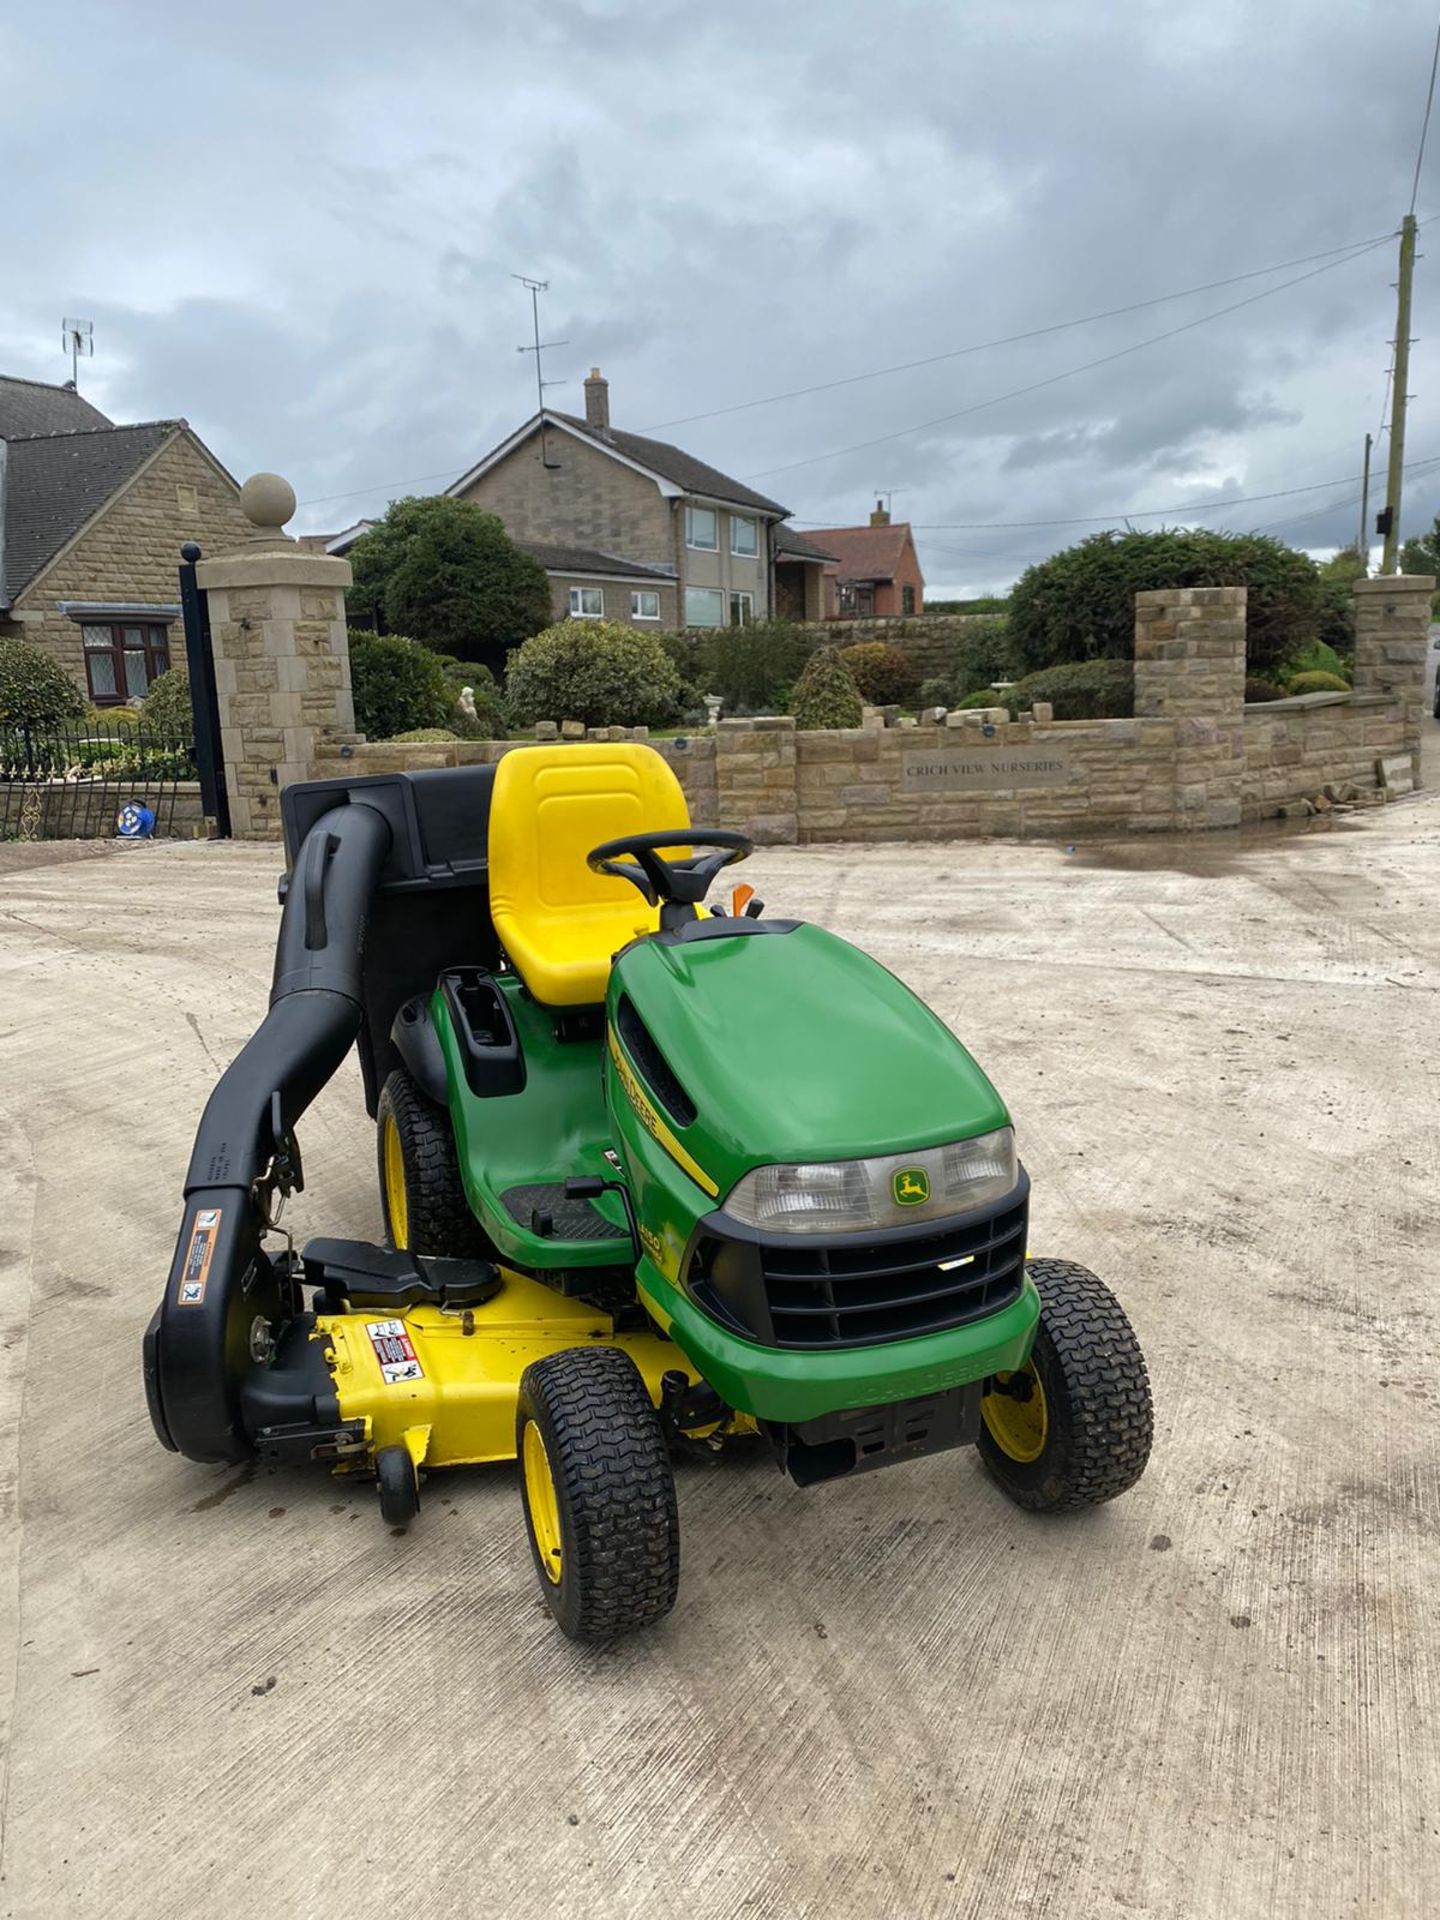 JOHN DEERE LA150 RIDE ON LAWN MOWER, RUNS AND WORKS WELL, 54 INCH CUTTING DECK *NO VAT* - Image 2 of 7